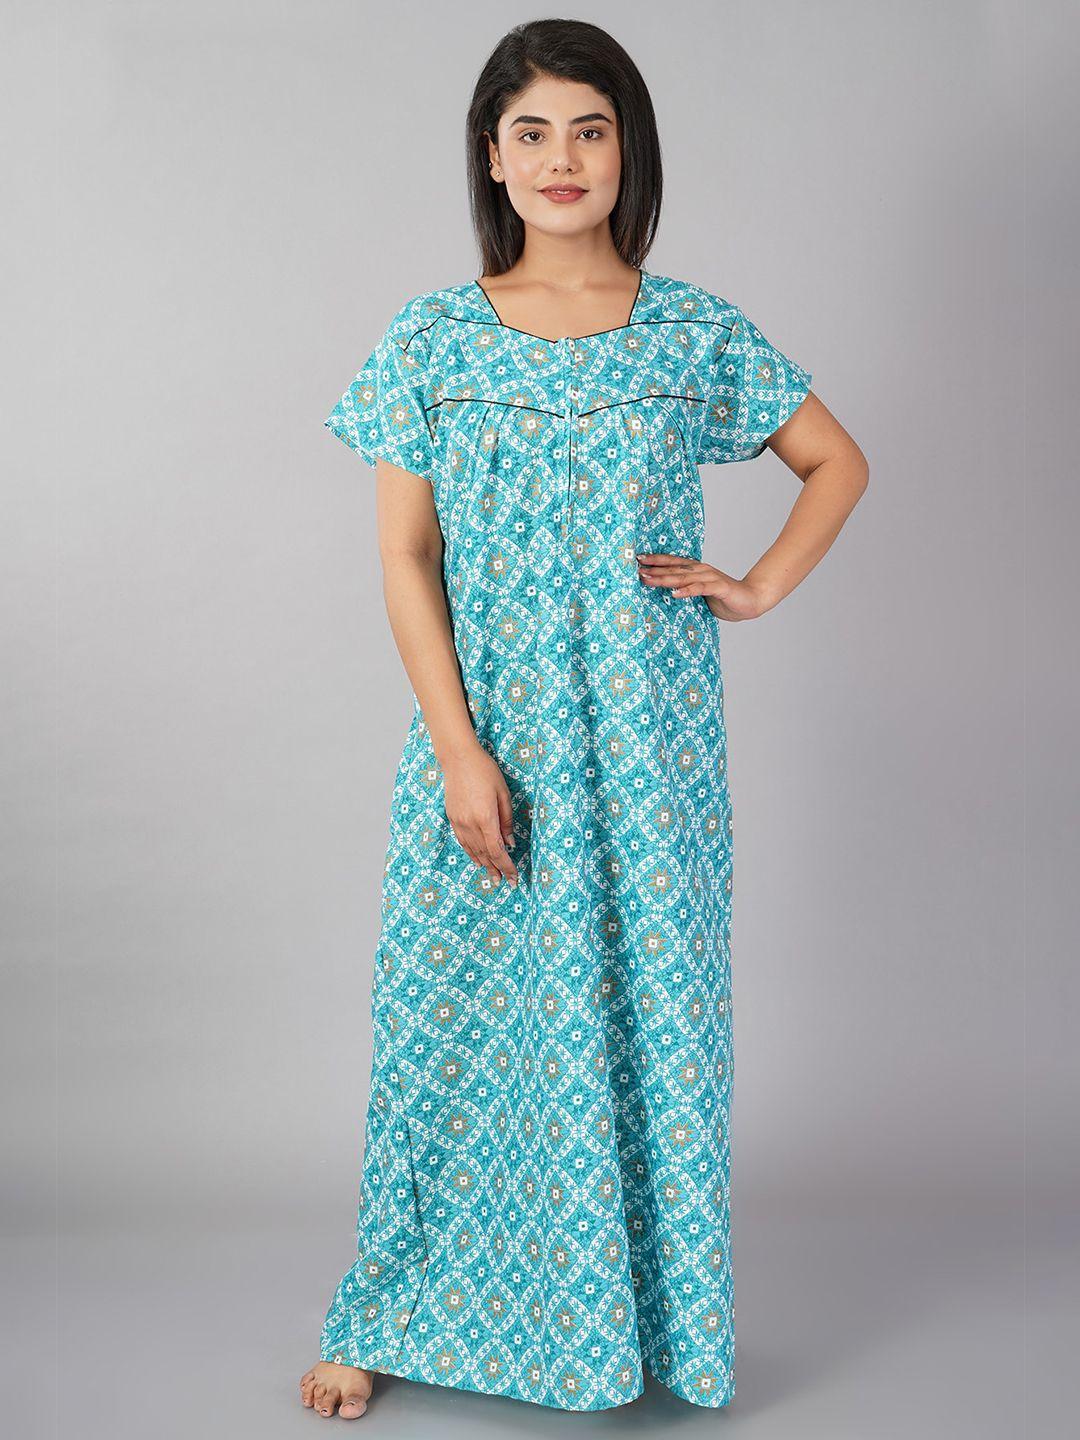 noty turquoise printed maxi nightdress